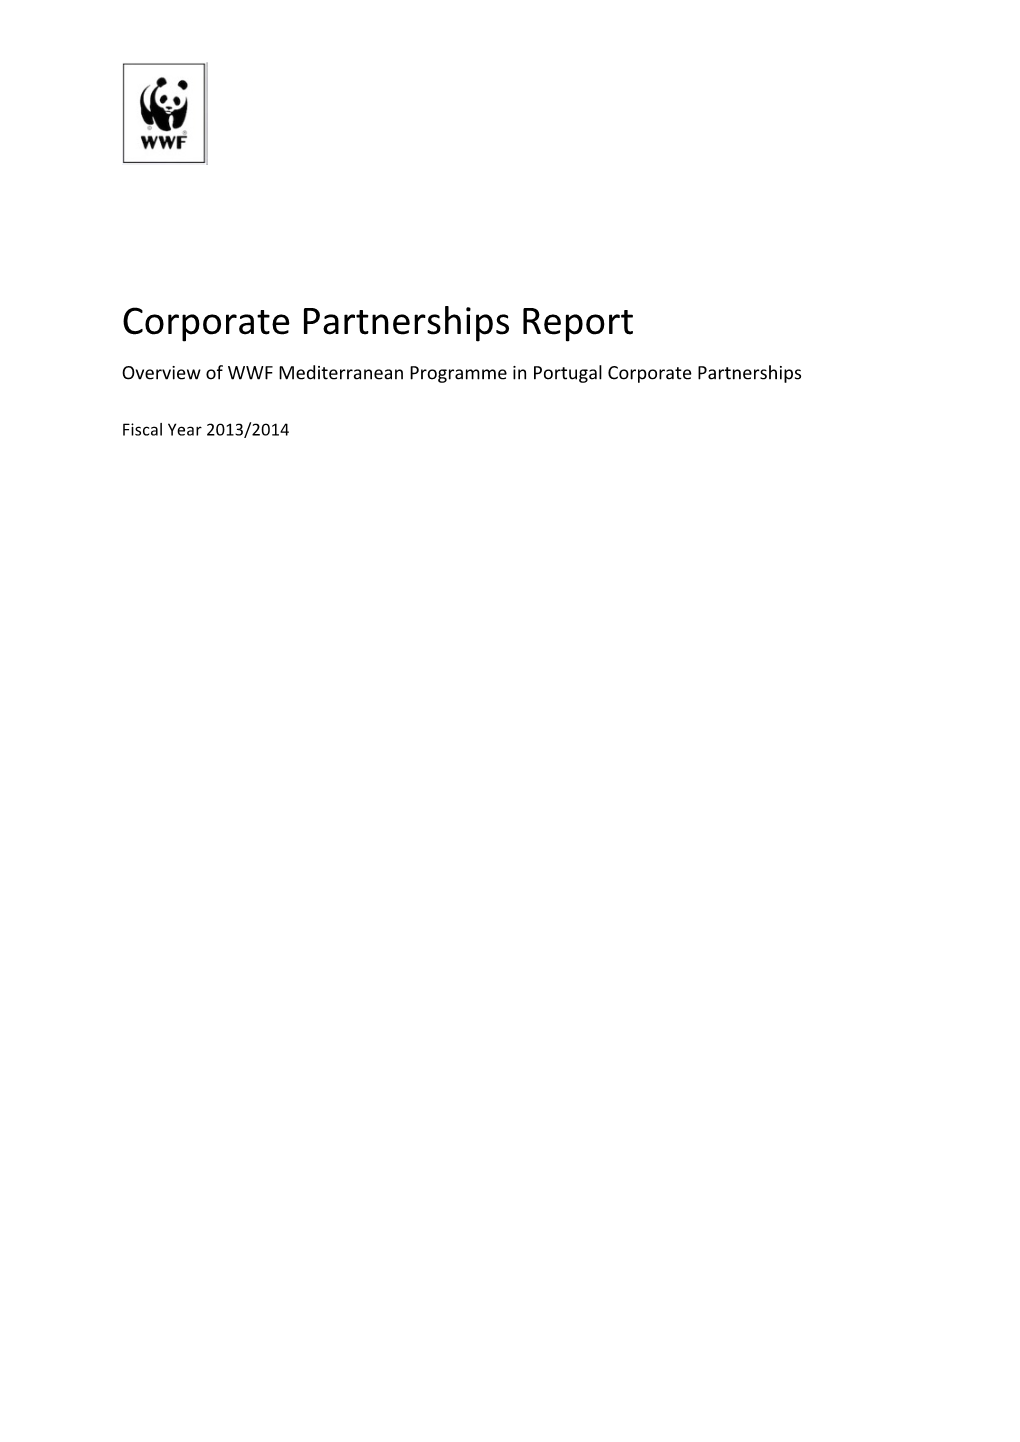 Corporate Partnerships Report Overview of WWF Mediterranean Programme in Portugal Corporate Partnerships